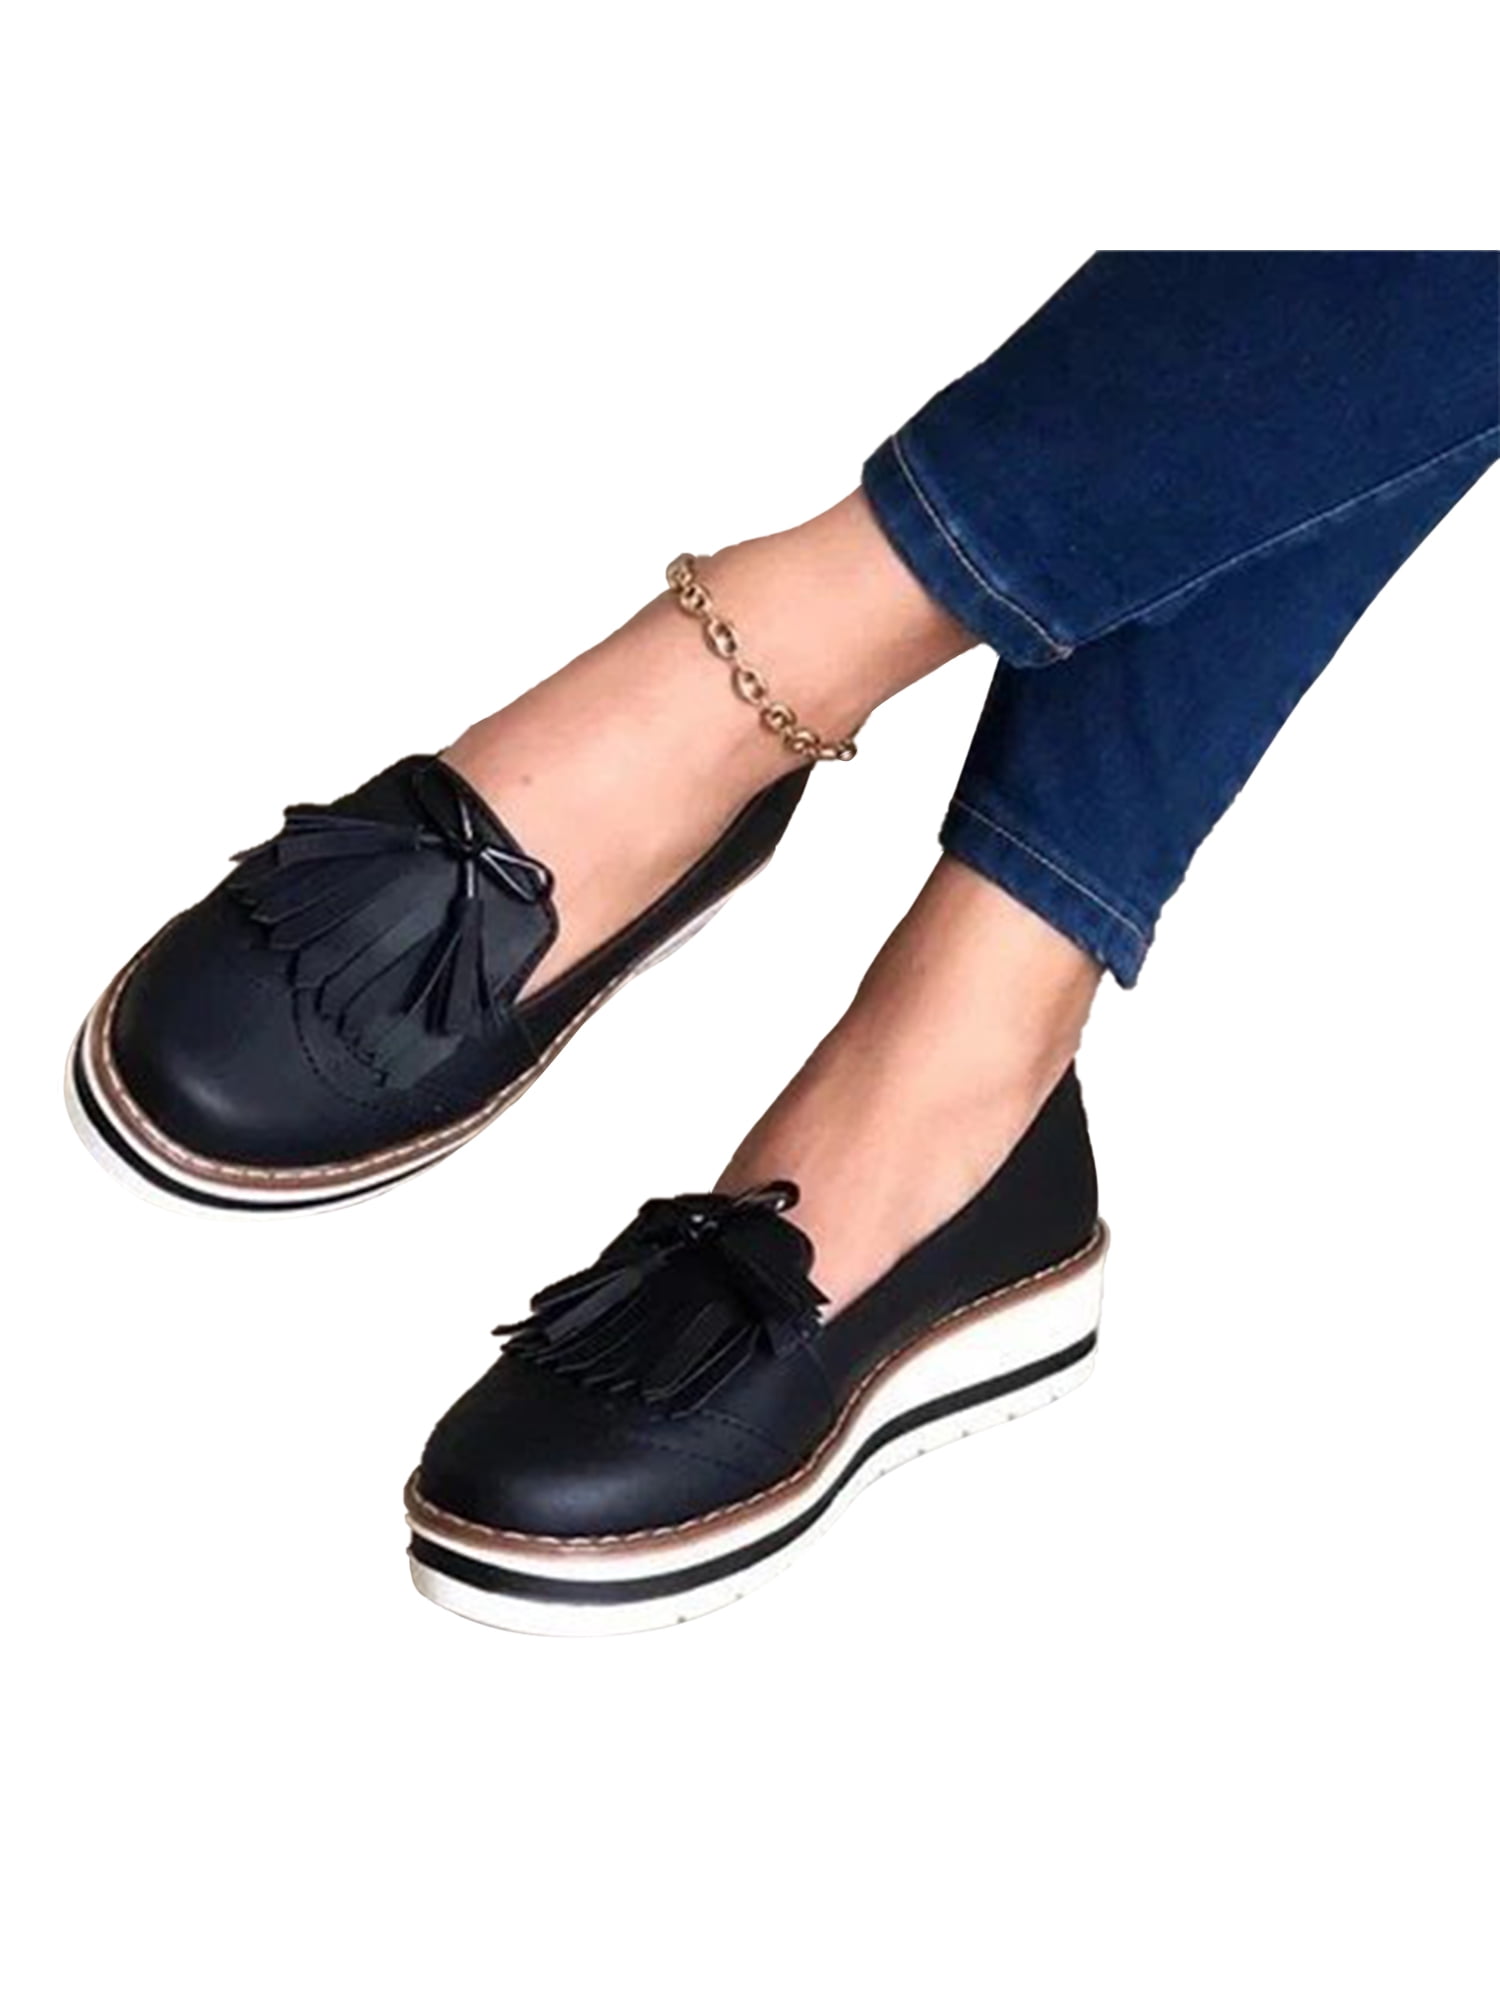 WOMENS LADIES LOW HEEL WEDGE LEATHER TASSEL LOAFERS COMFORT MOCCASINS SHOES SIZE 